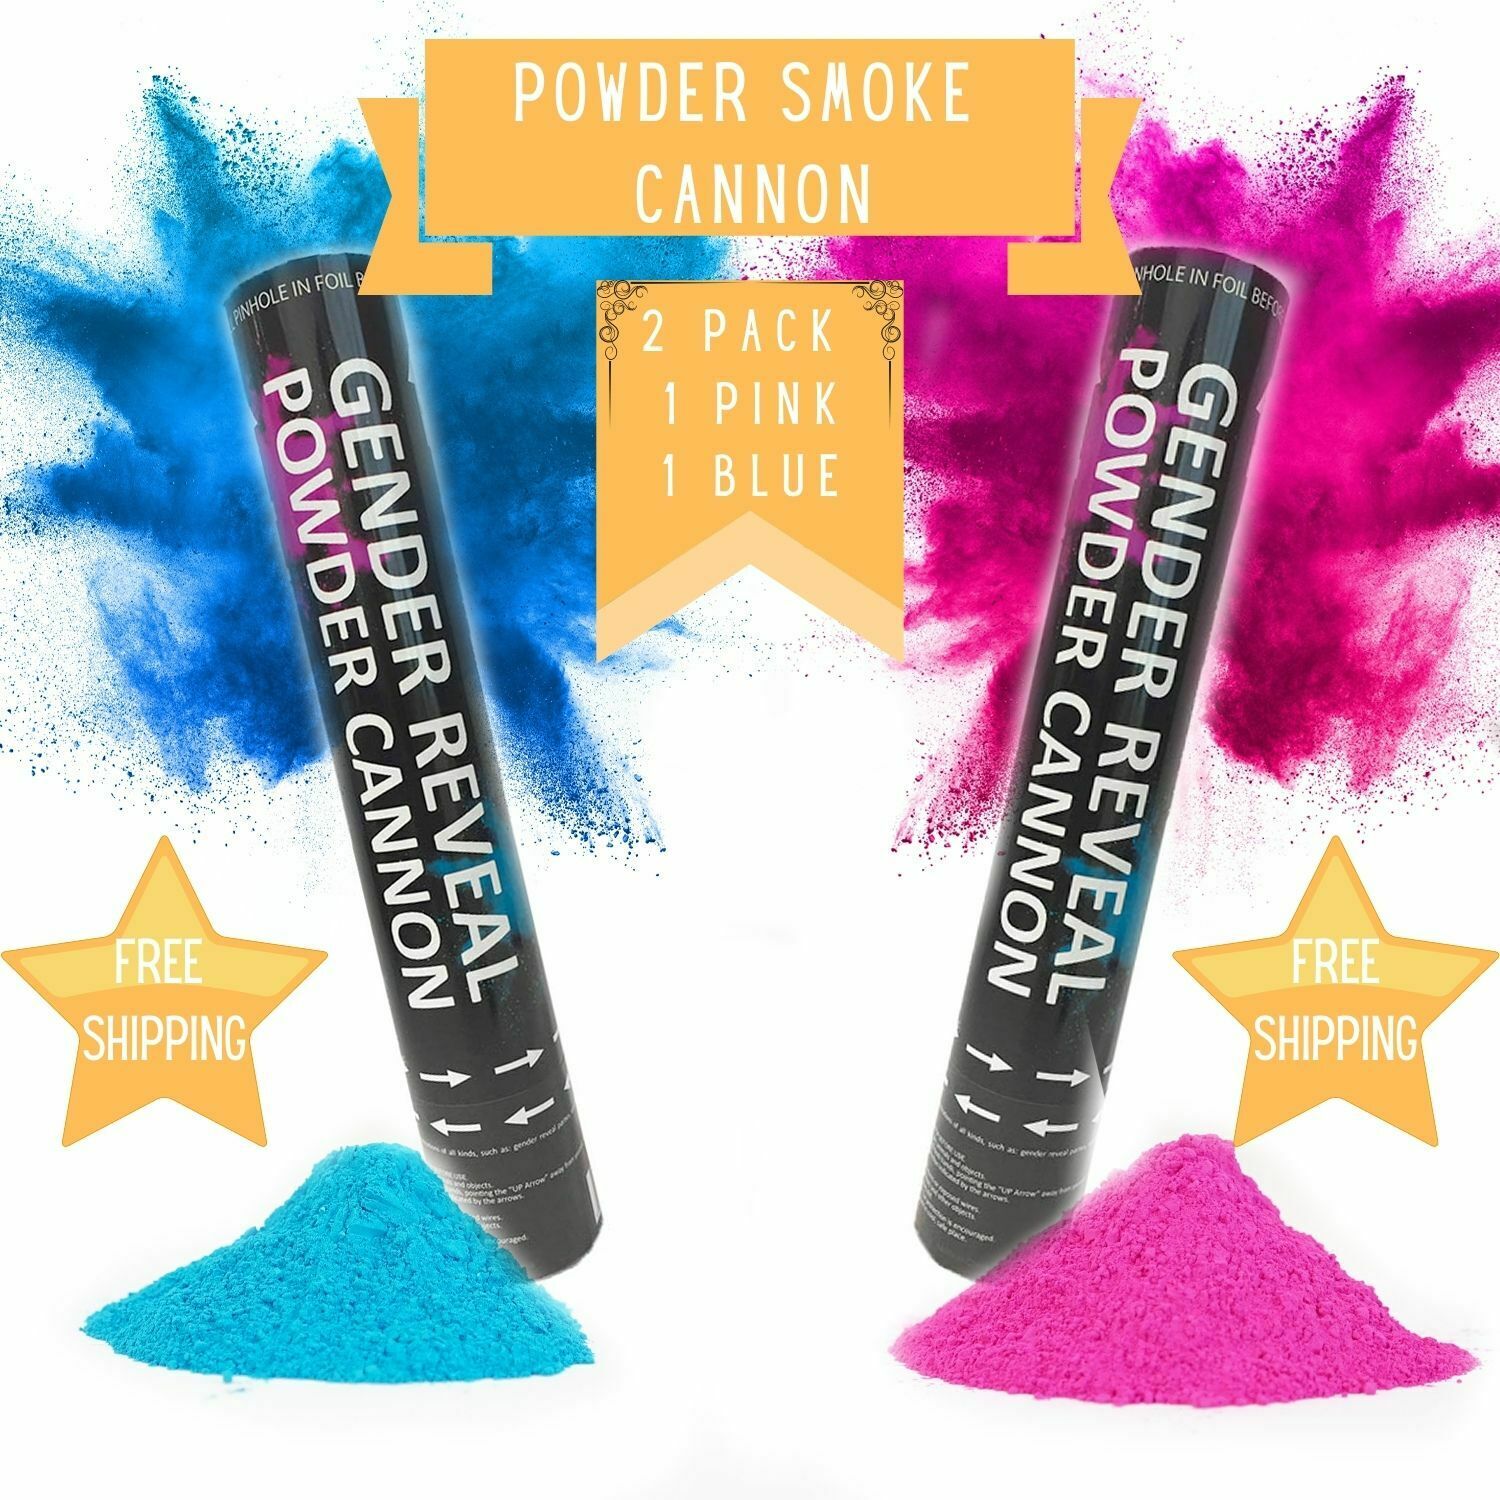 2 Pack Gender Reveal Smoke/powder Cannons - Color Cannon [1 Pink & 1 Blue]